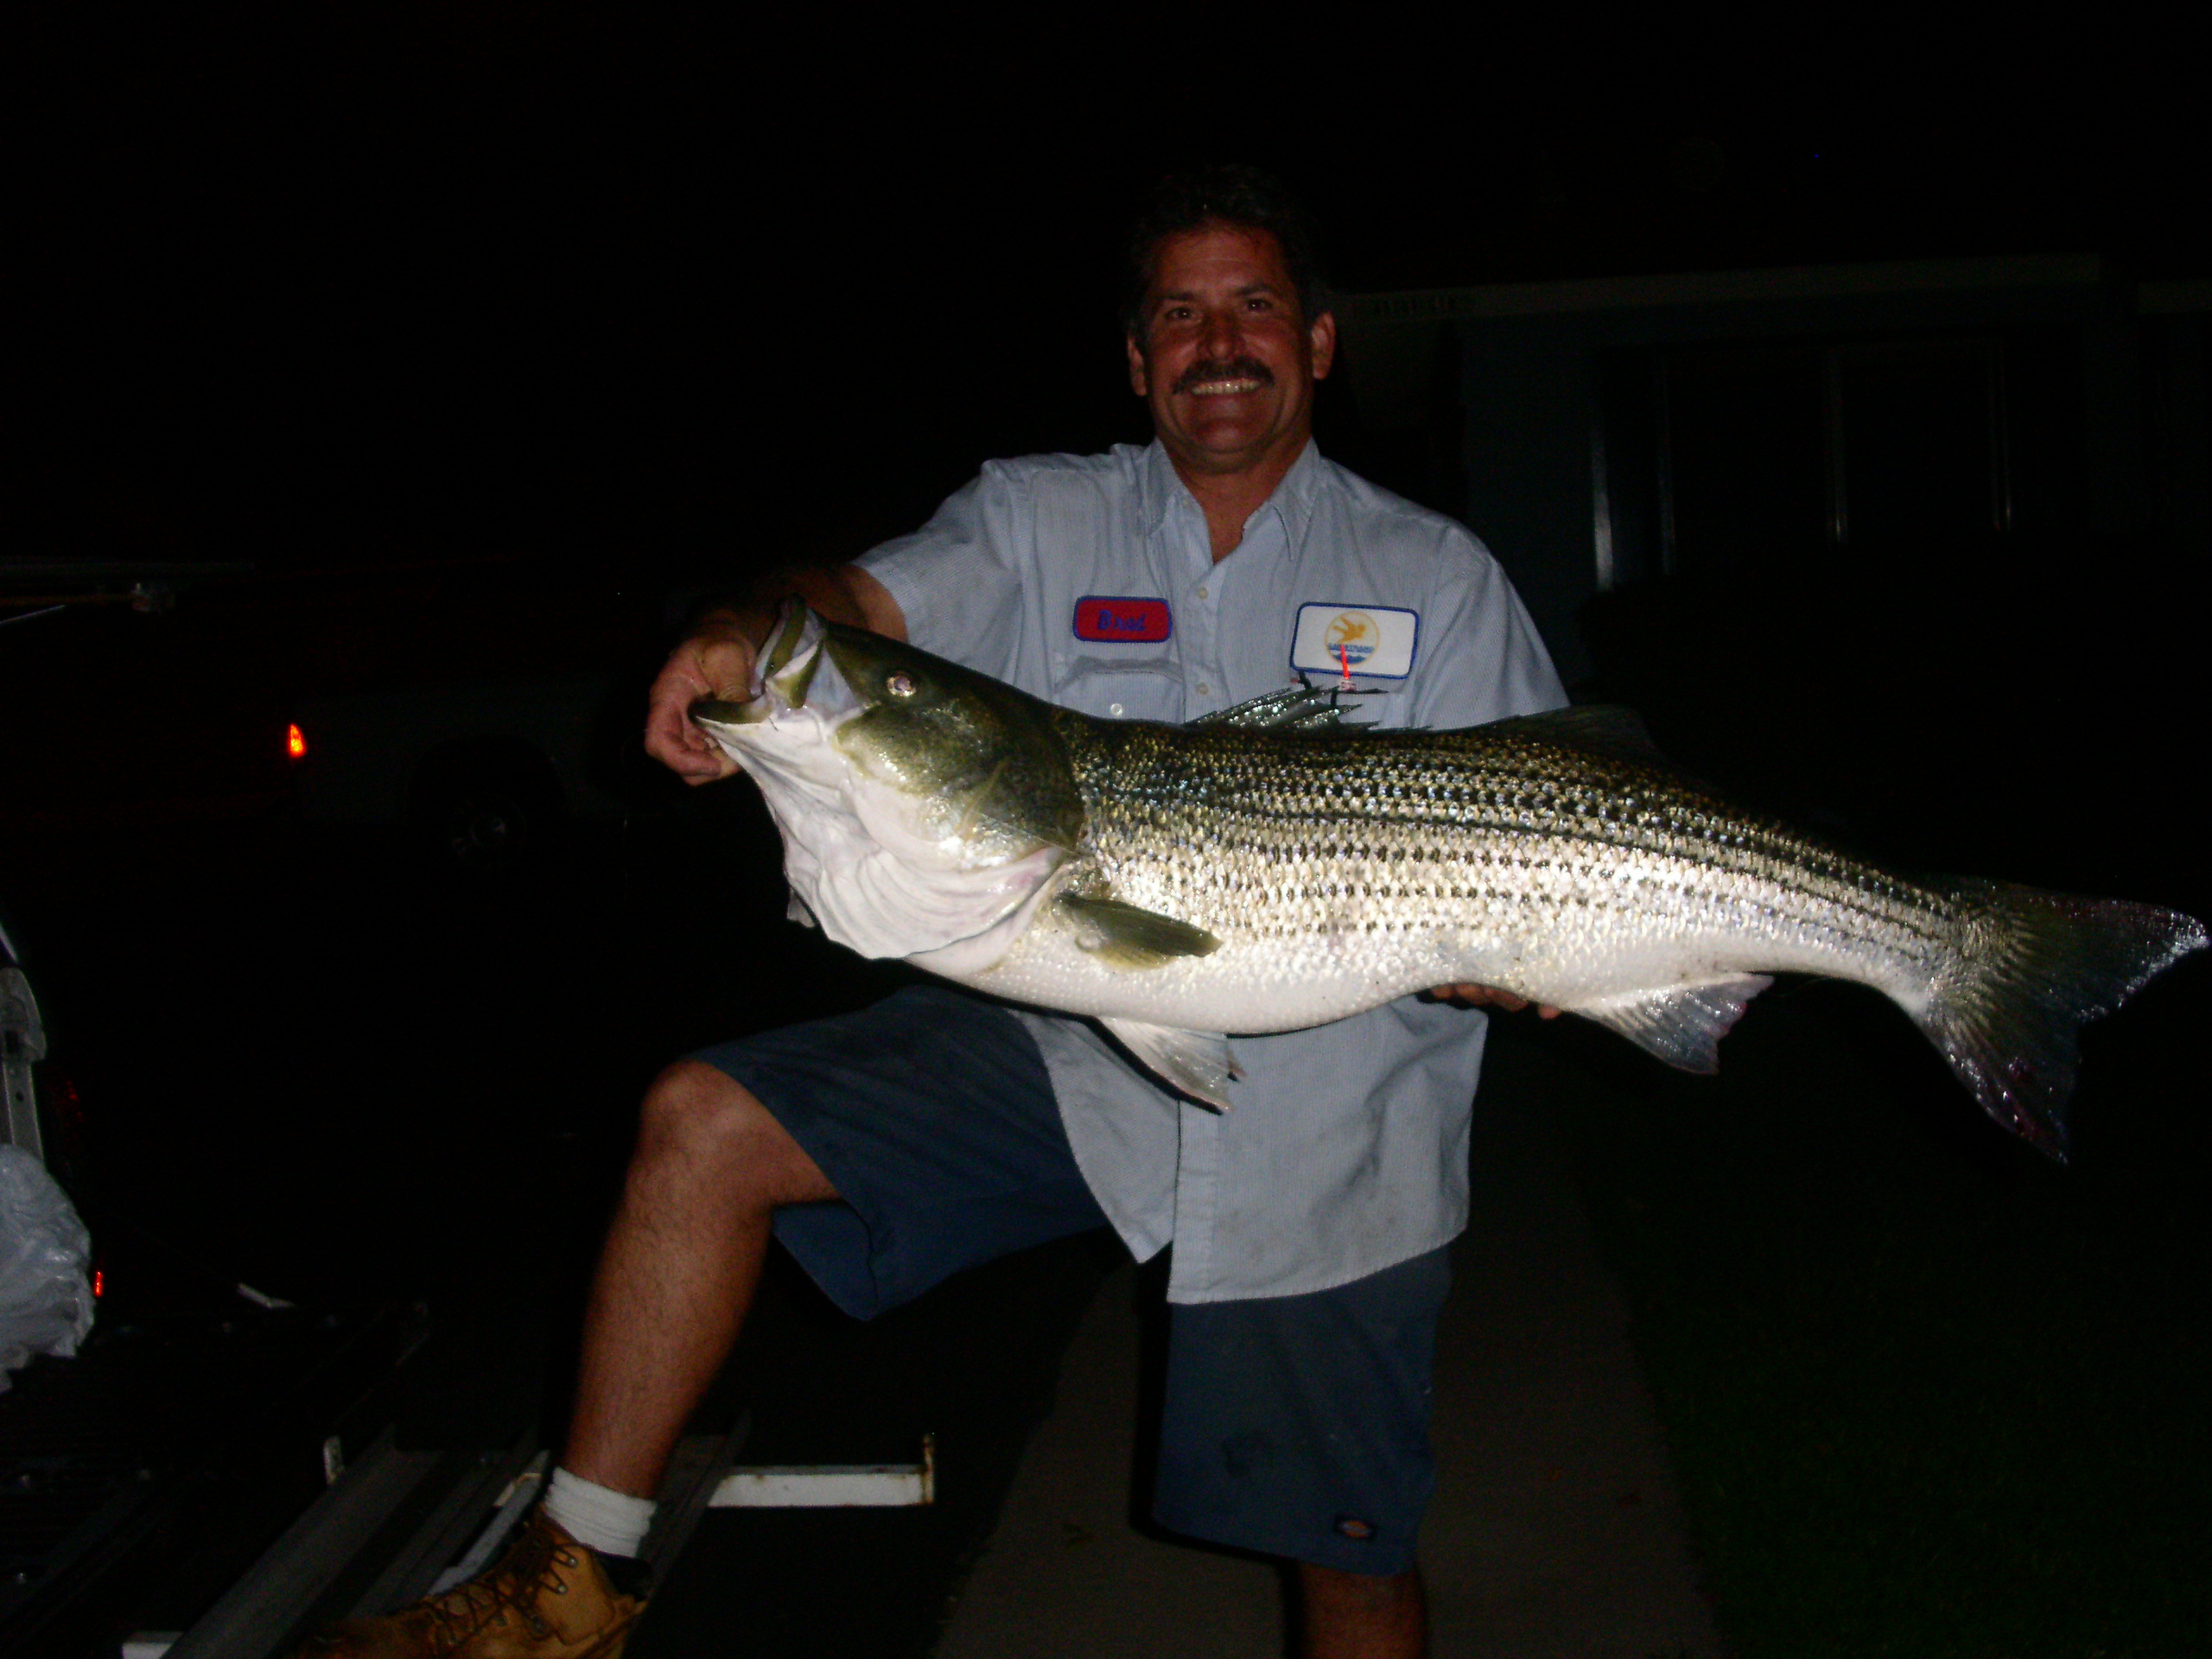 Striped bass fishing in estuaries, bays and along the beach with Greg Silks